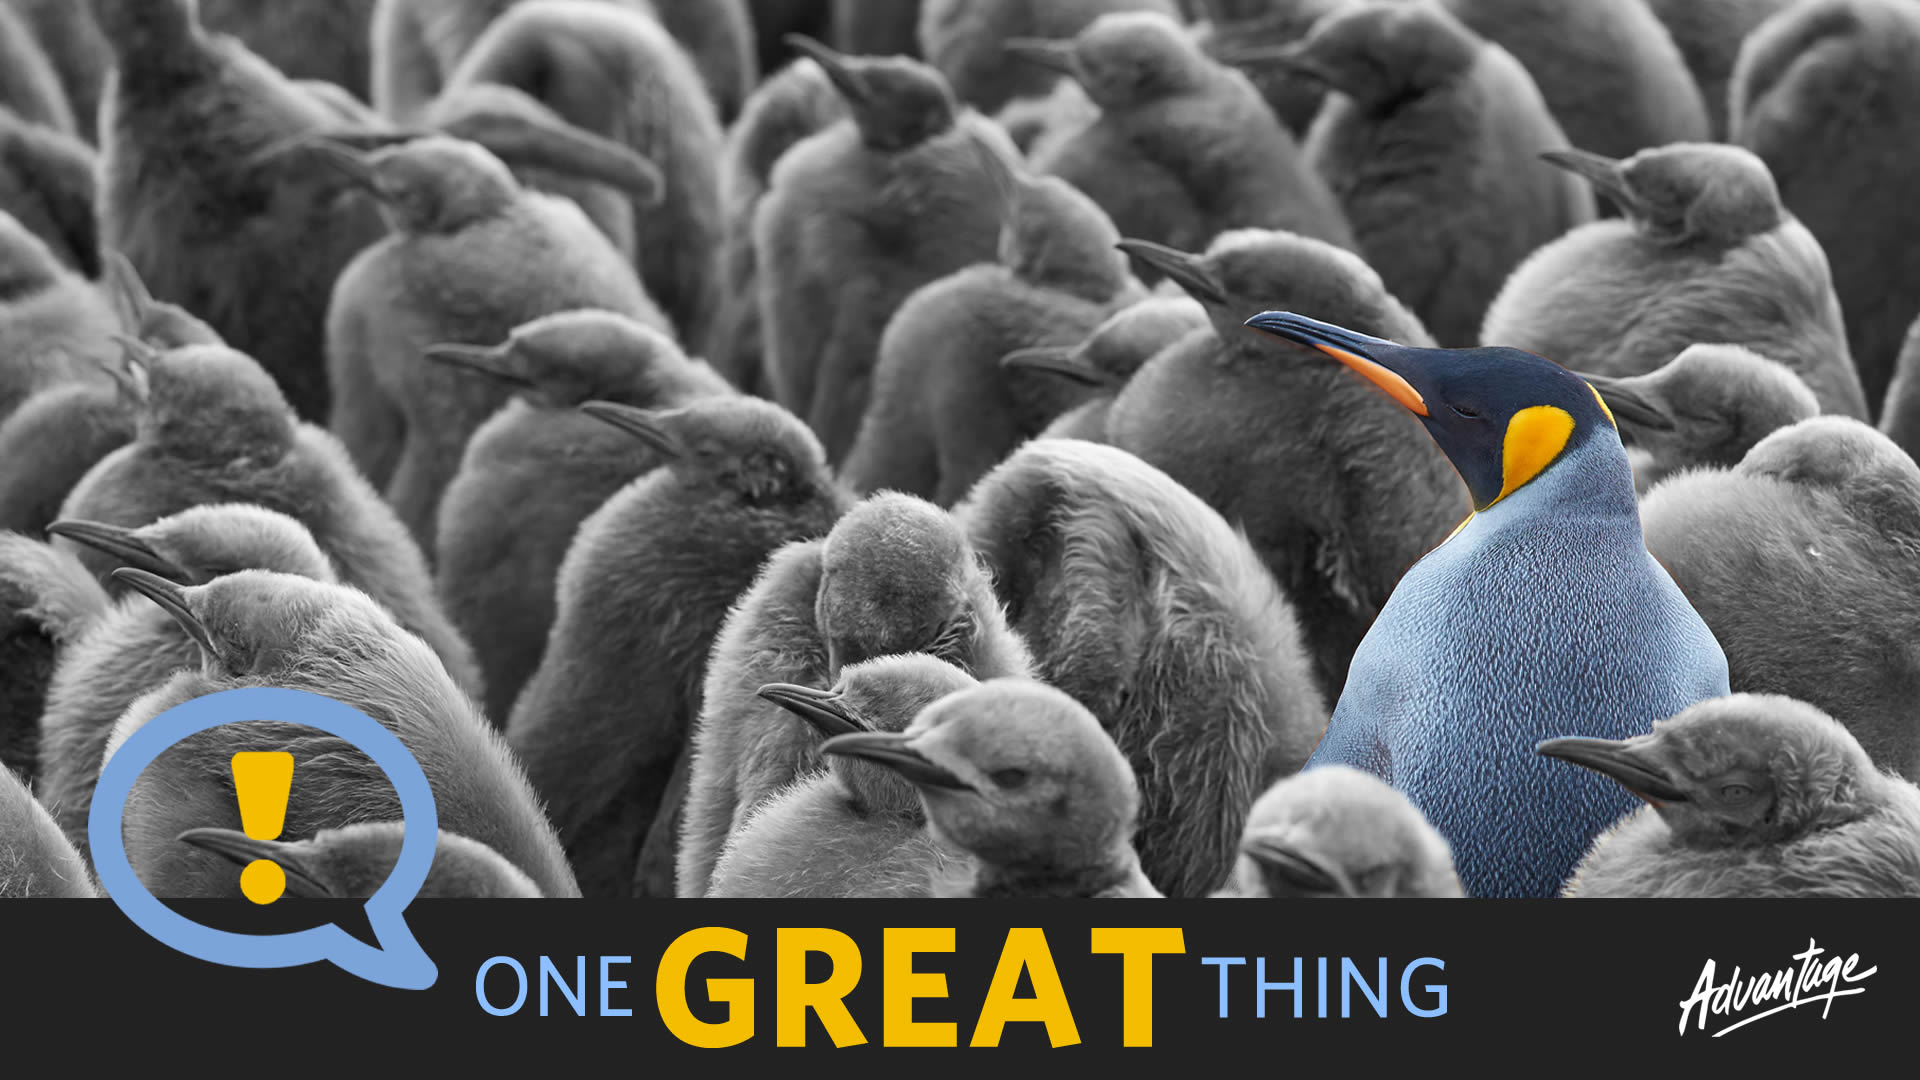 One Great Thing (image of a colorful penguin standing  out in a group of others